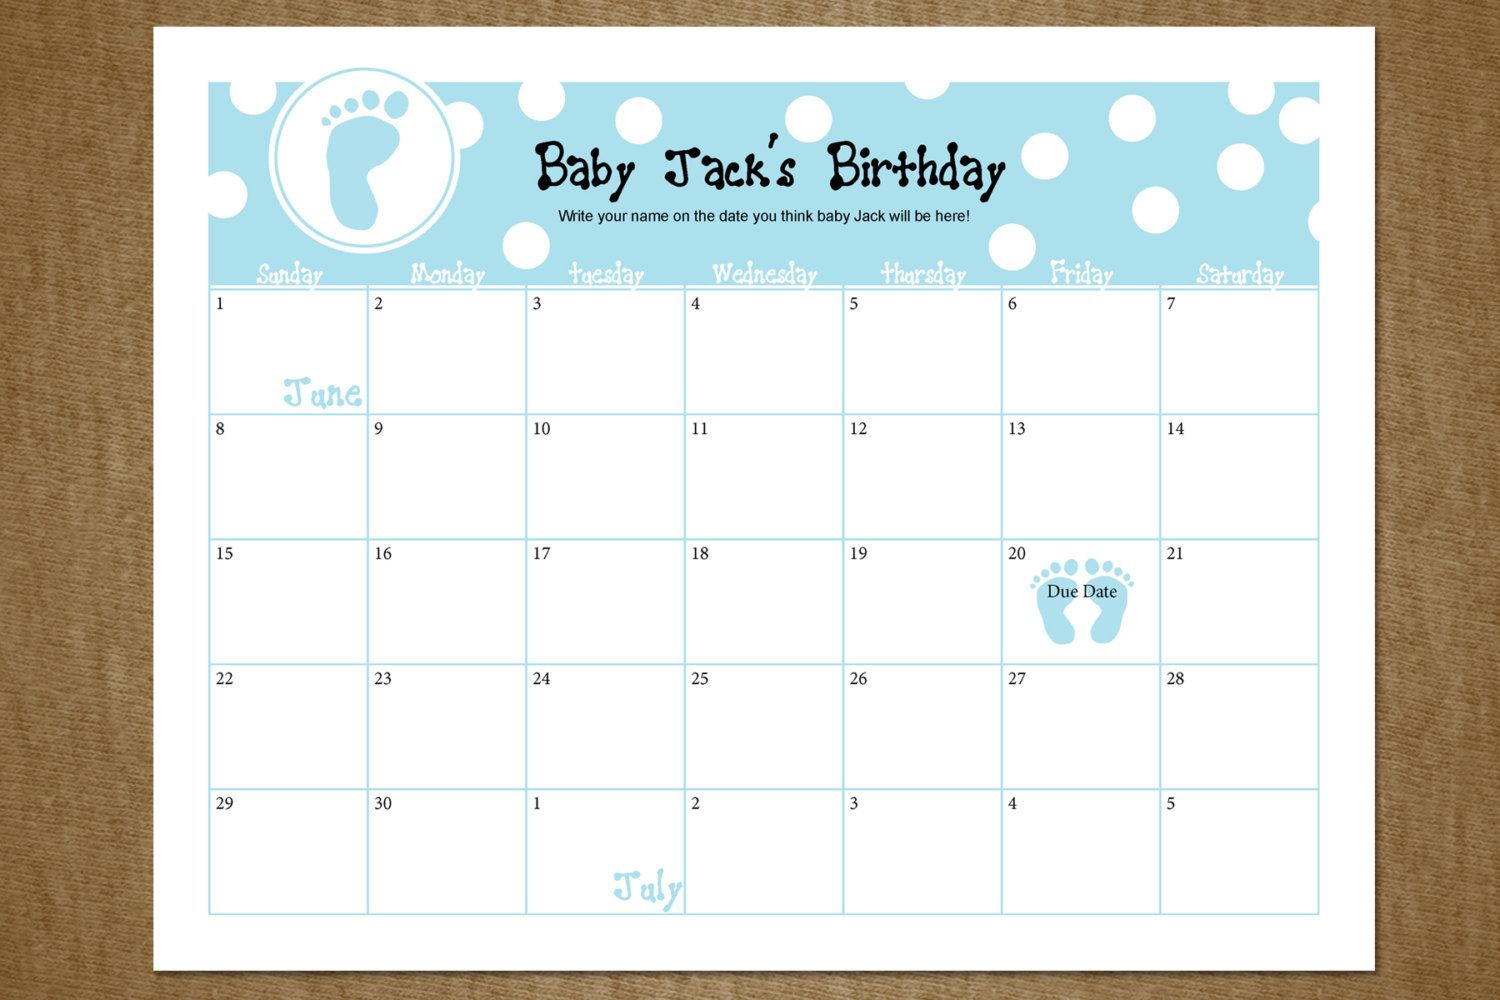 Free Printable Baby Due Date Guess Calendar In 2020 | Baby for Free Printable Due Date Calendar